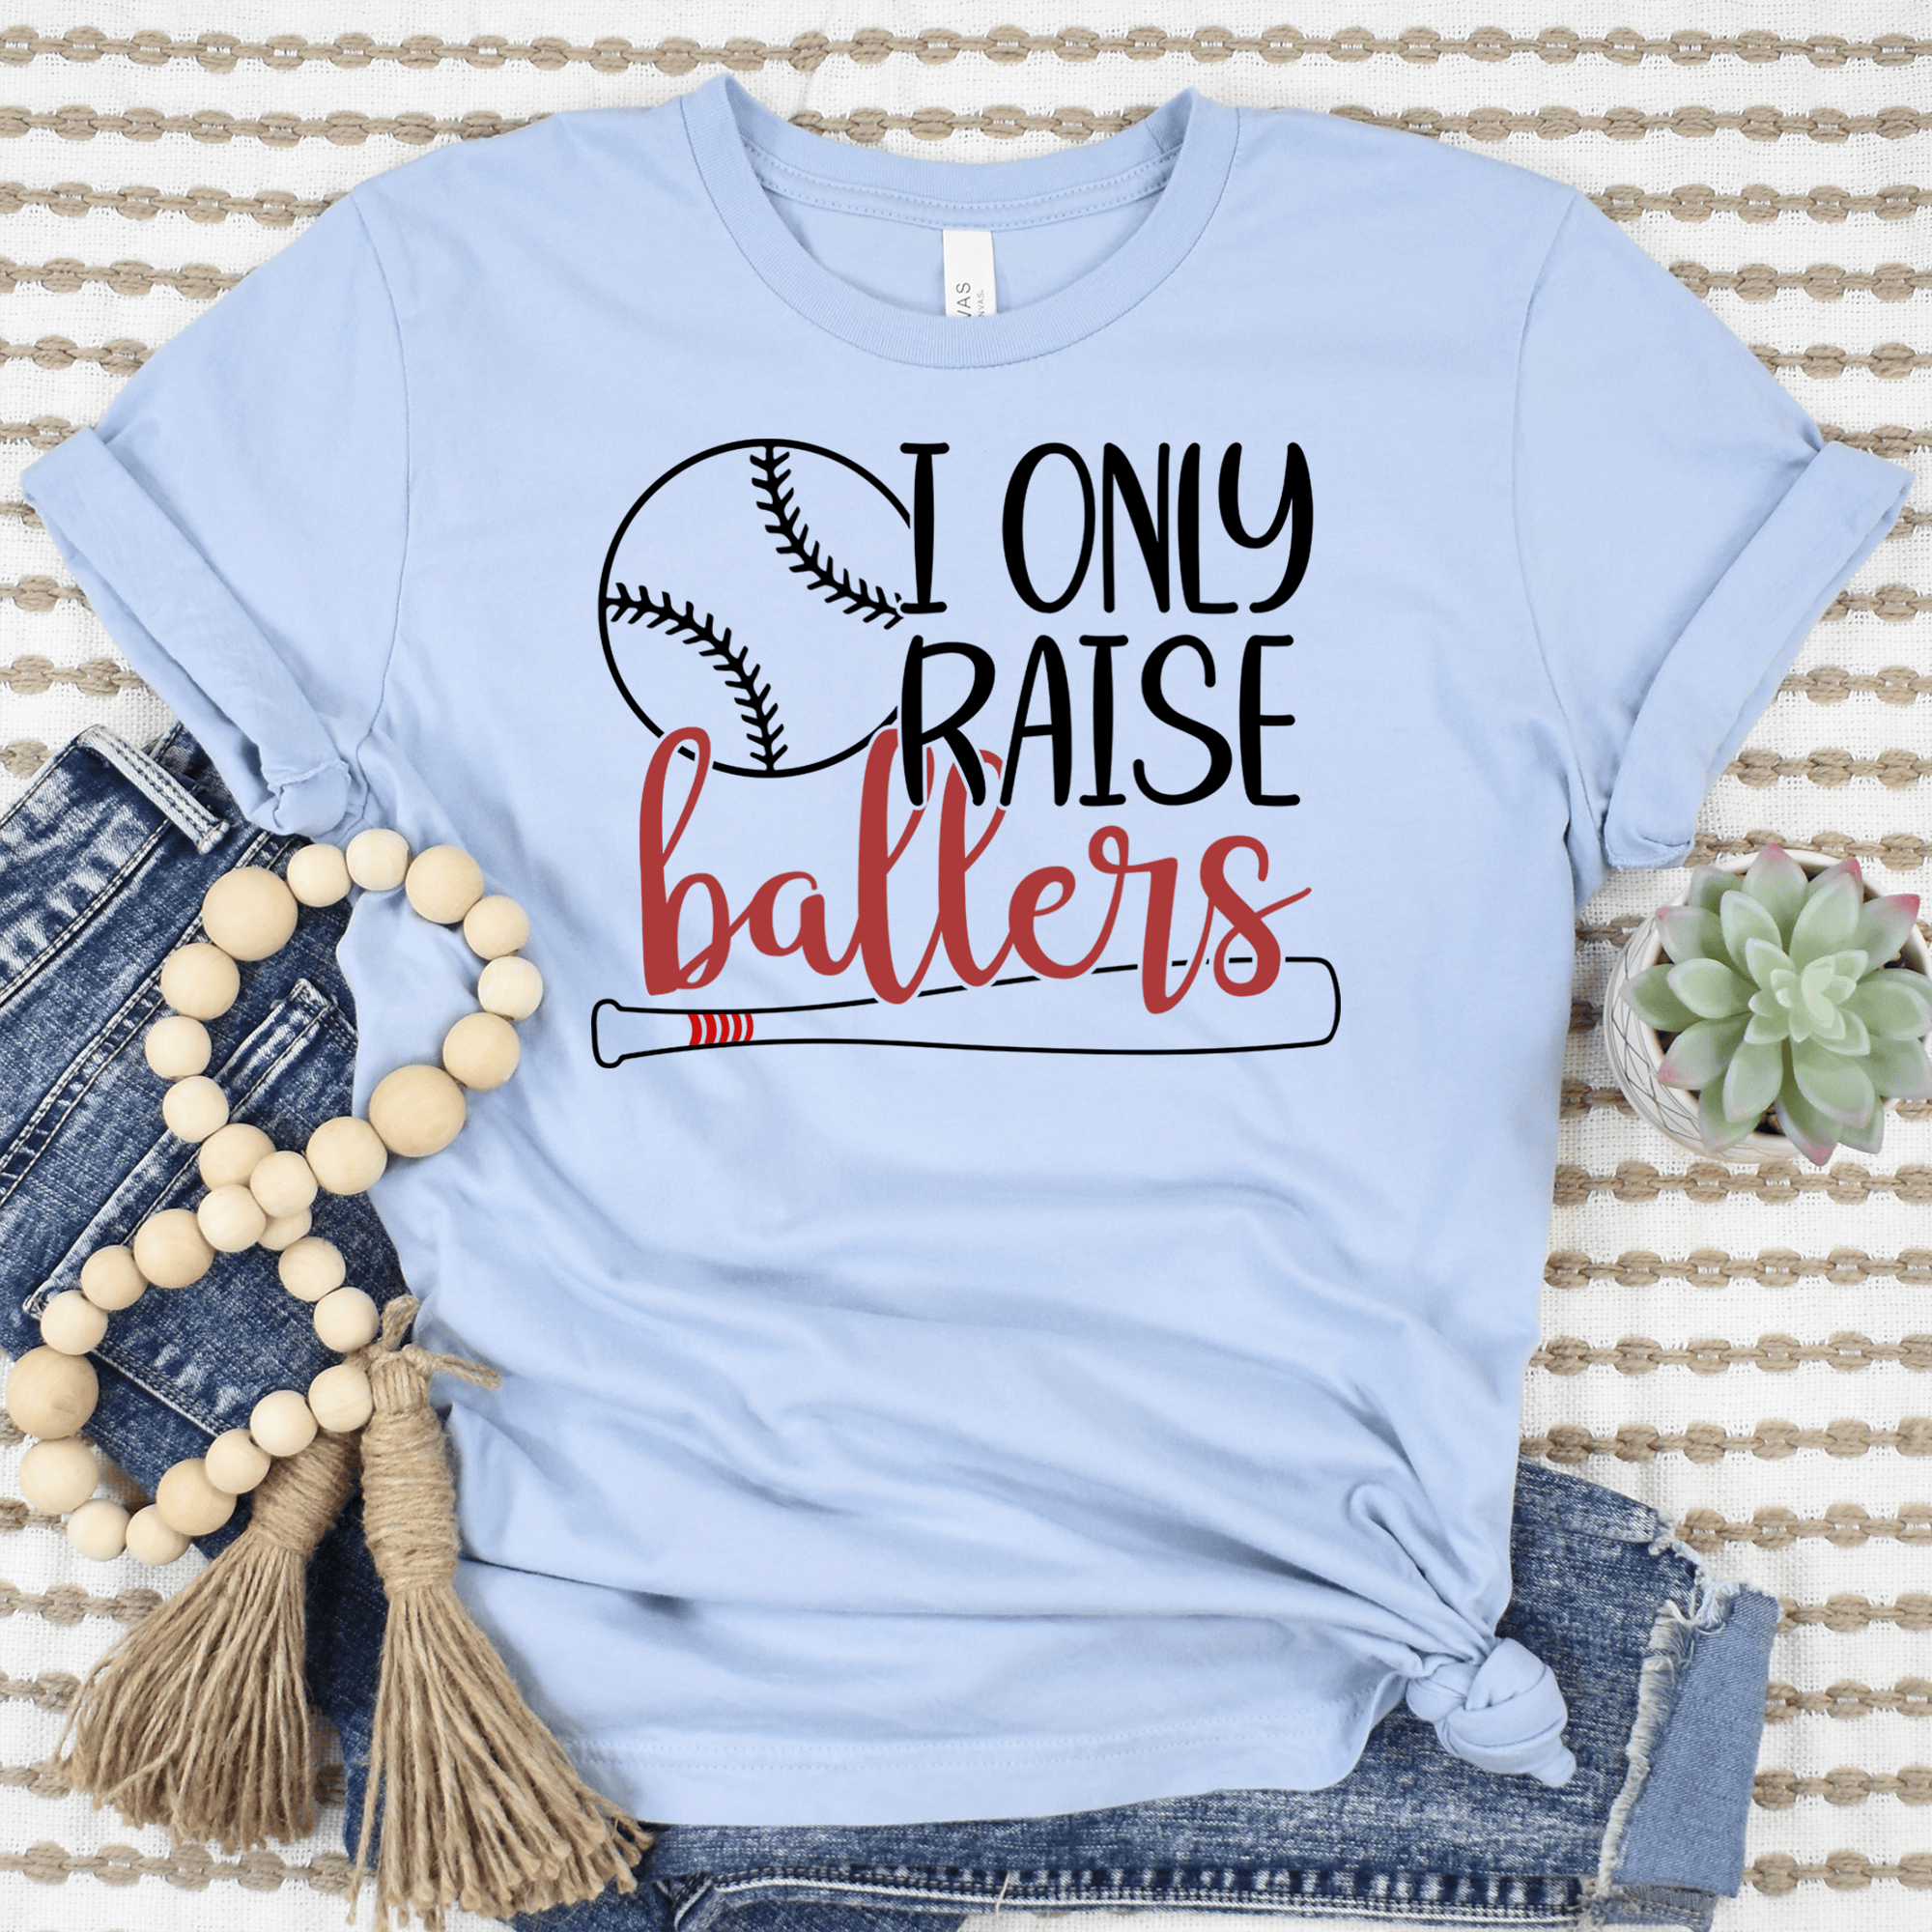 Womens Light Blue T Shirt with I-Only-Raise-Ballers design